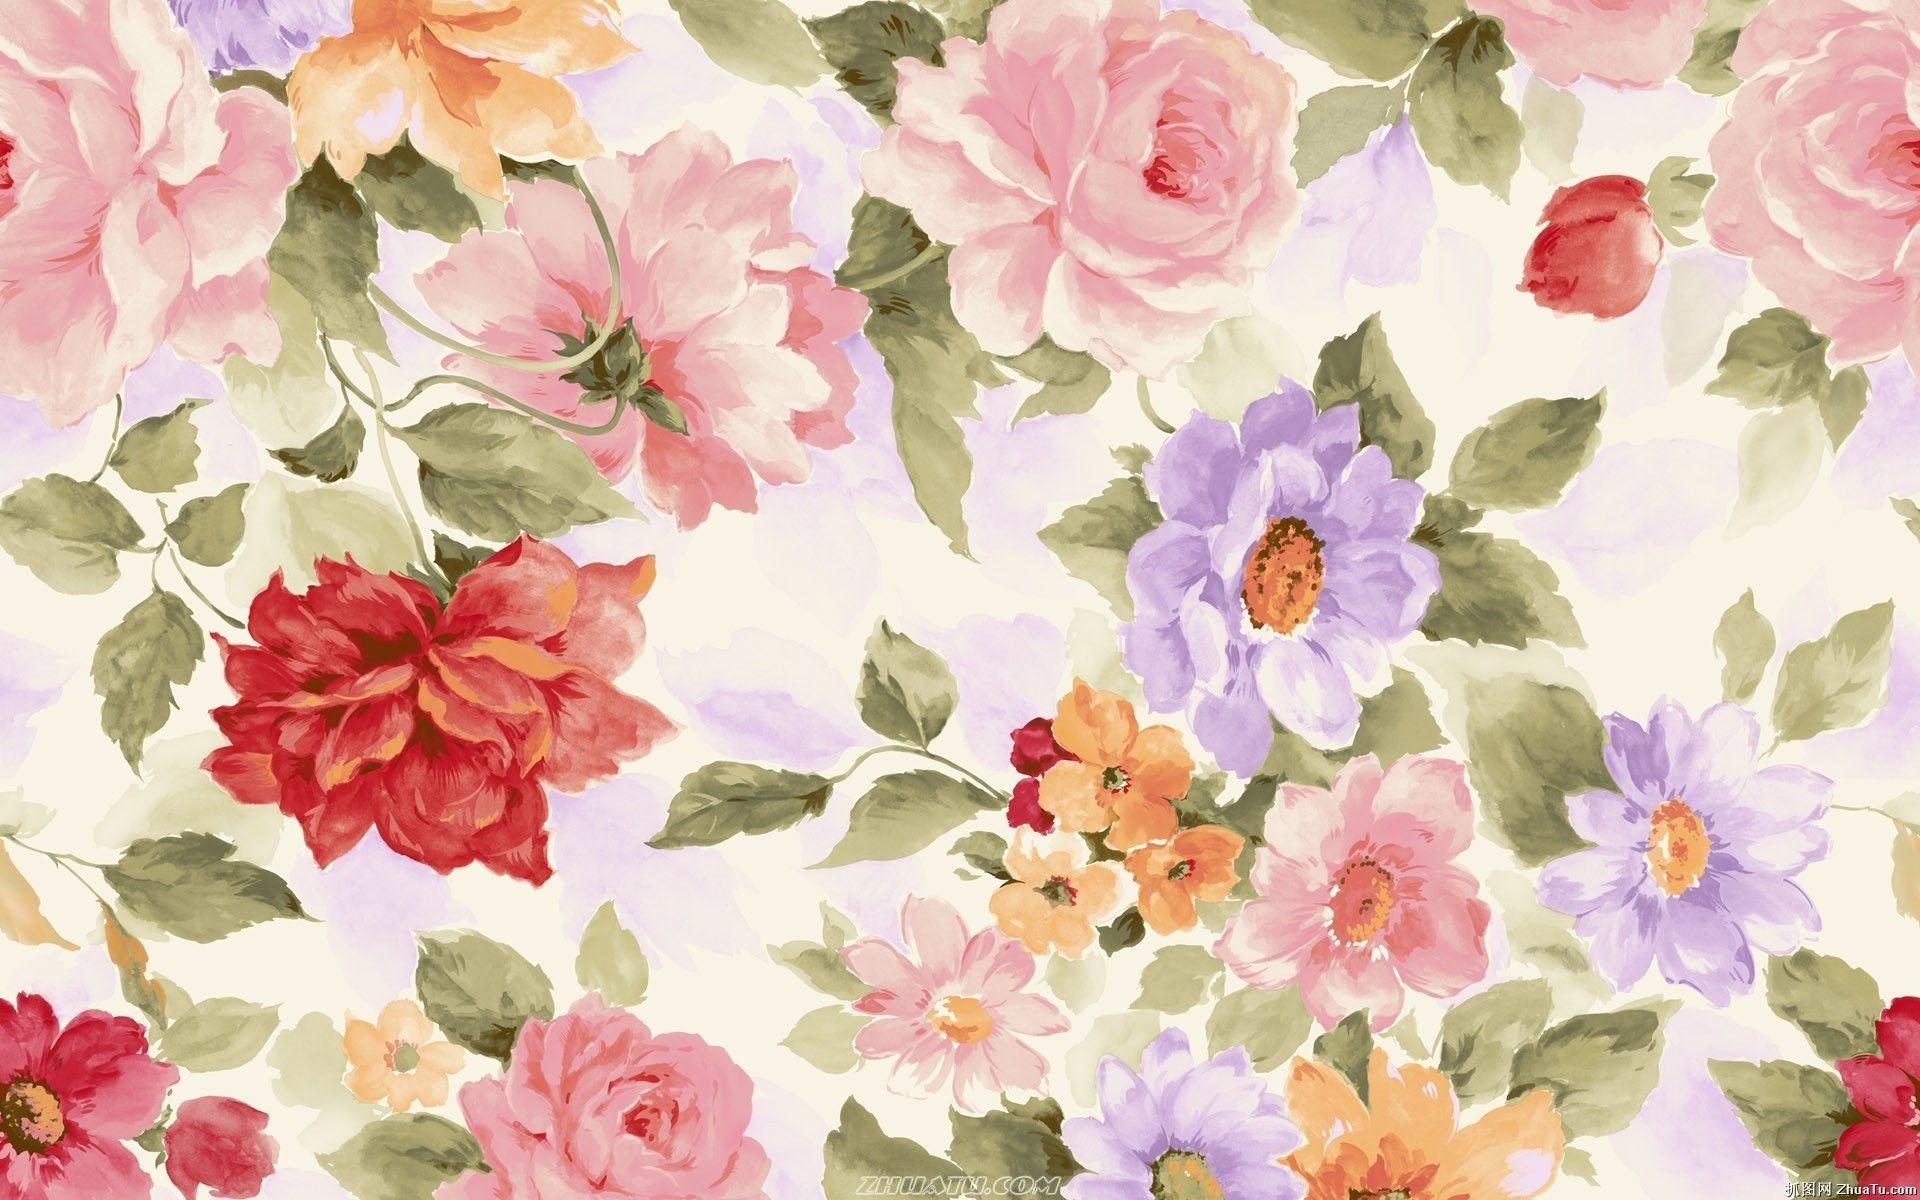 Flowers Background Watercolor